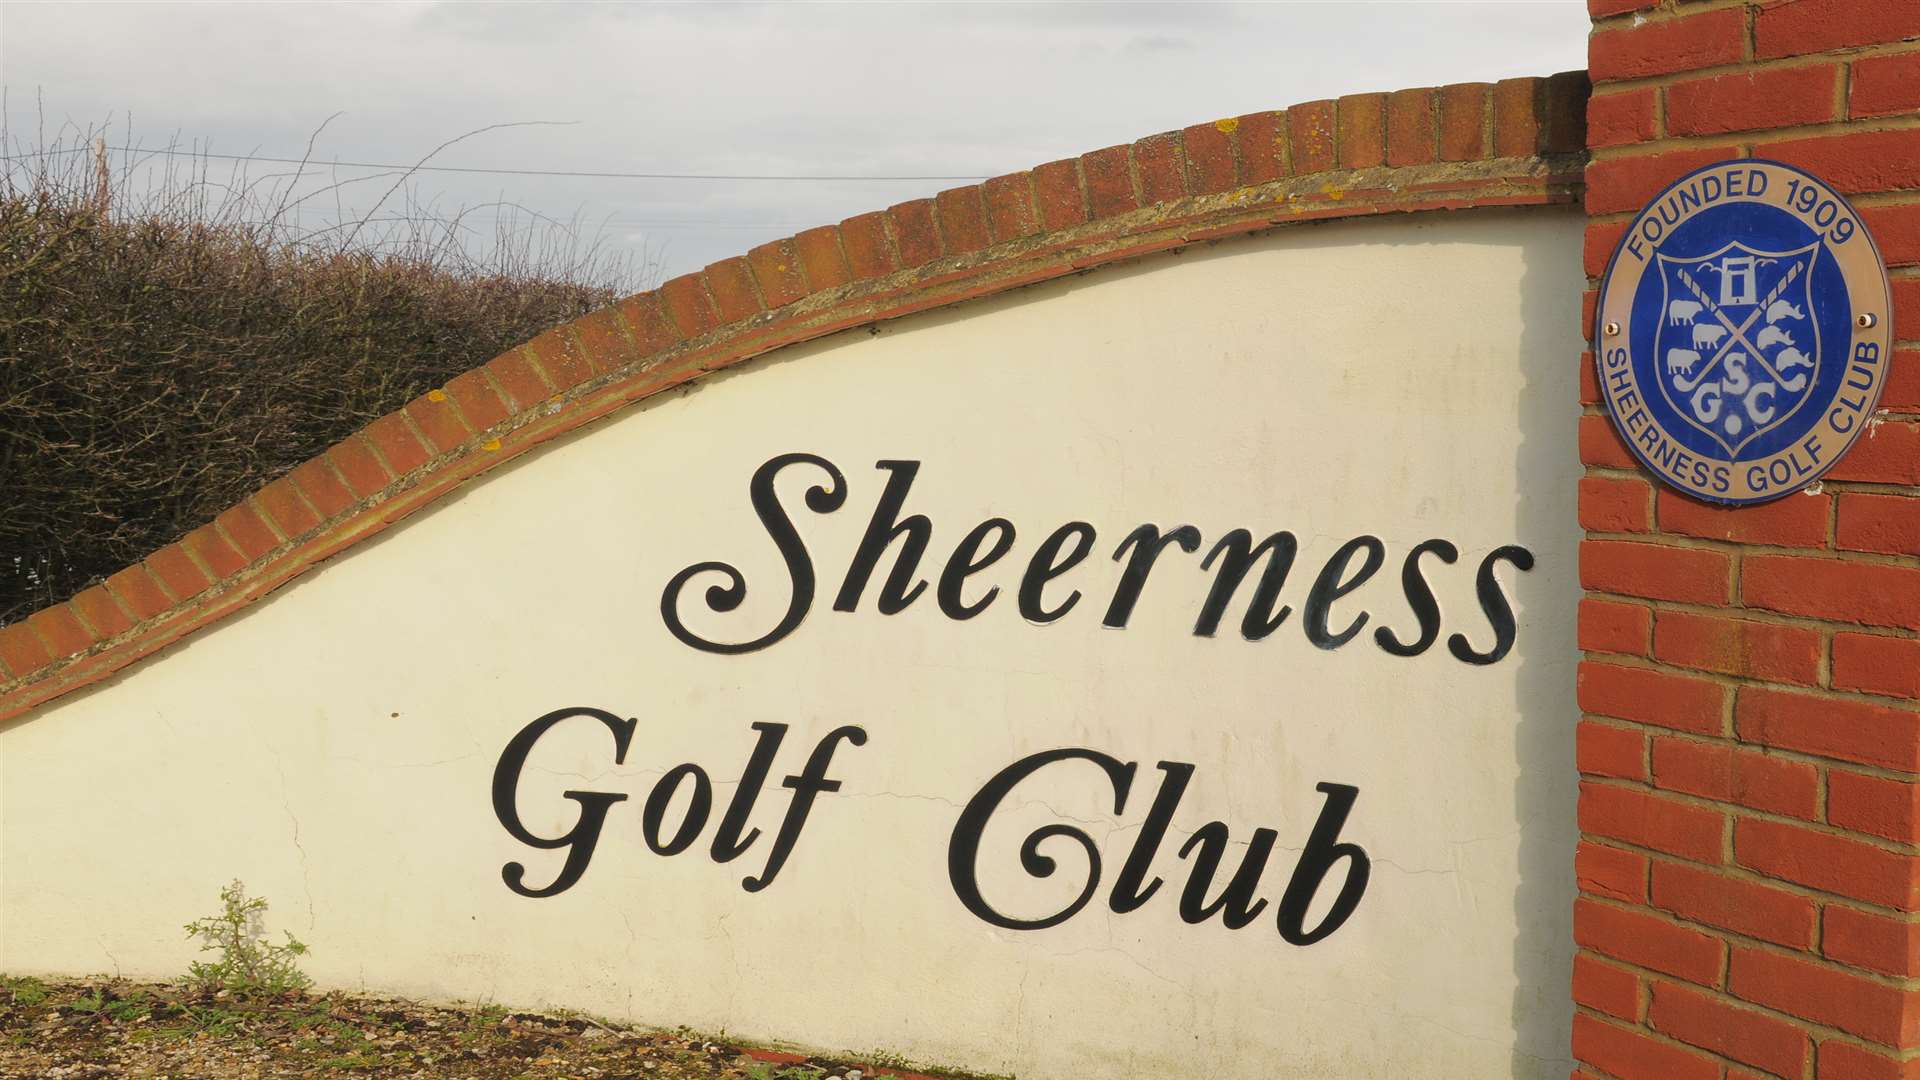 Sheerness Golf Club, Power Station Road, Sheerness.